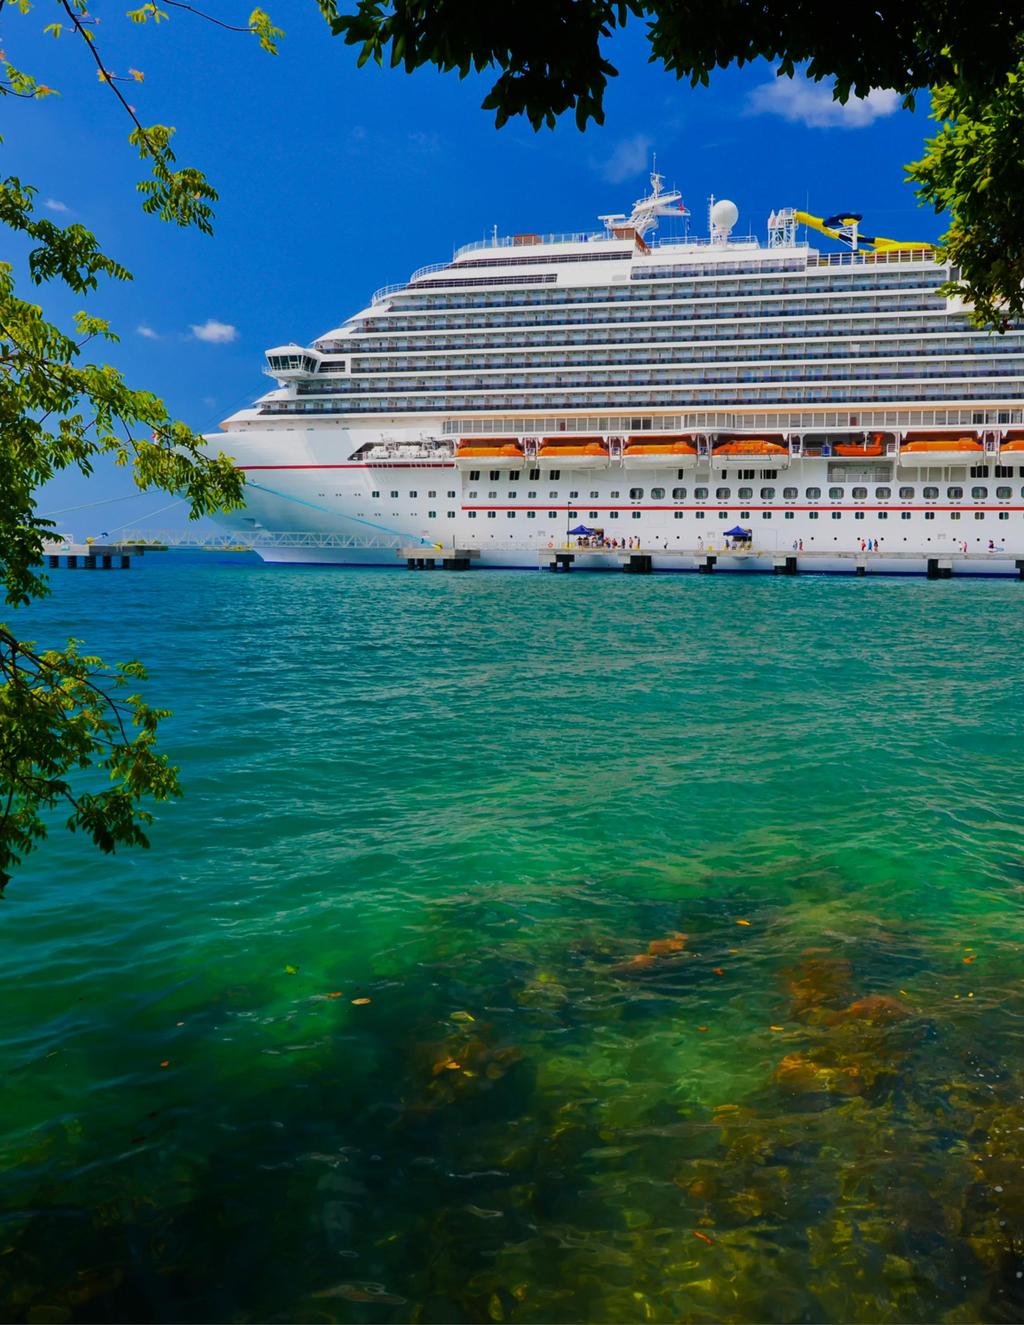 HOW PEOPLE PLAN THEIR VACATIONS Slightly more than half of the non-cruiser population is definitely or somewhat interested in taking an ocean cruise, which creates opportunities for growth in the